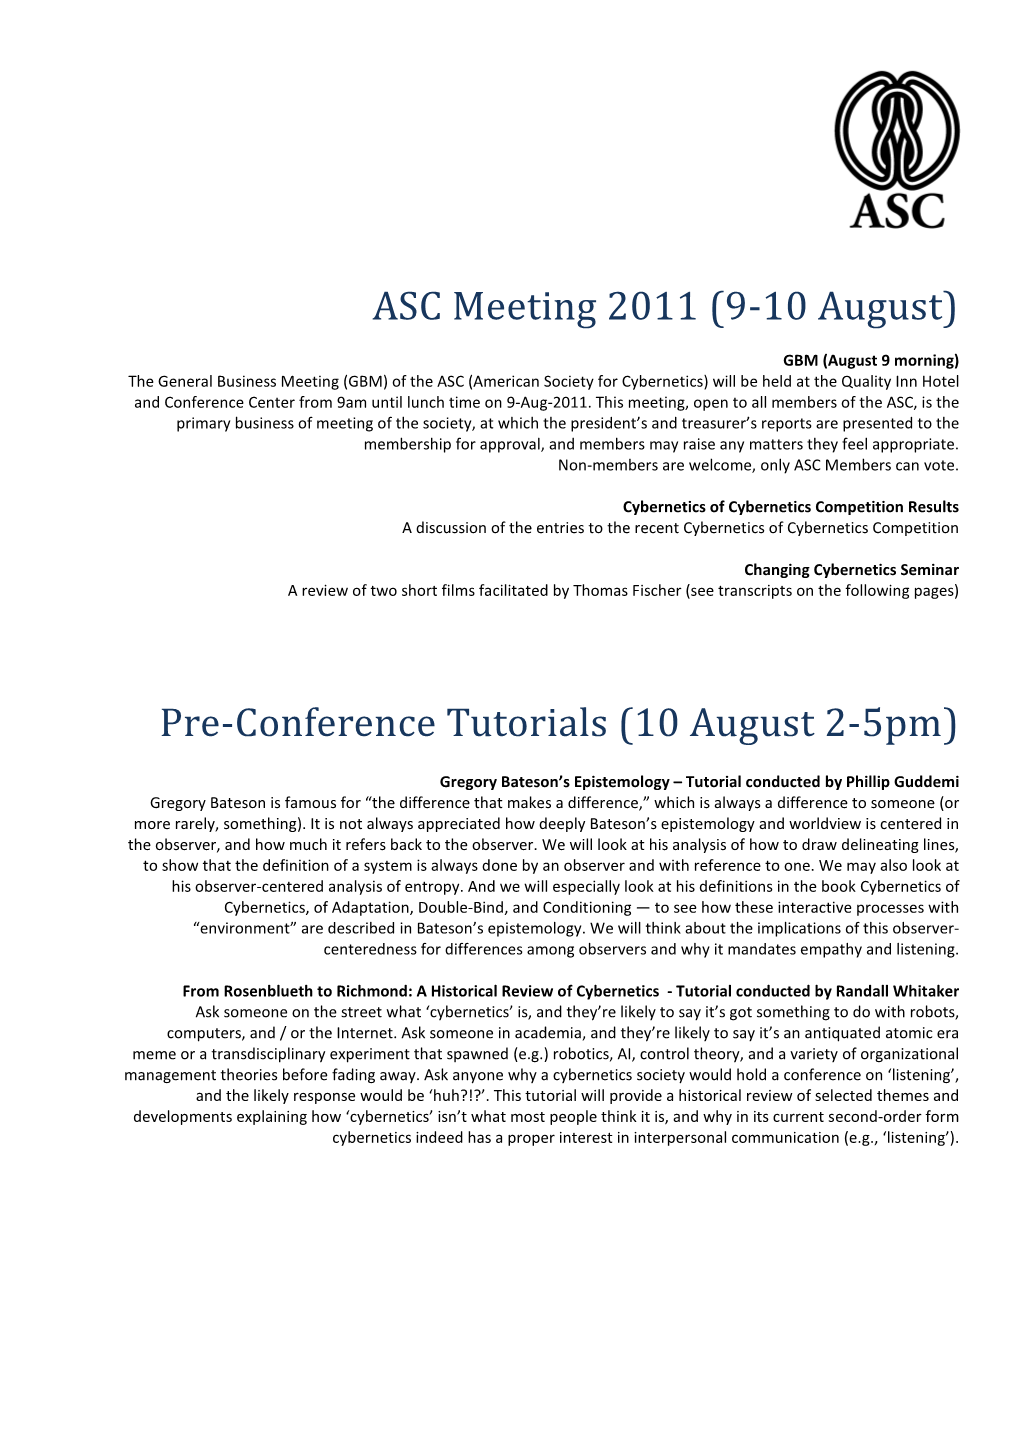 ASC Meeting 2011 (9-10 August) Pre-Conference Tutorials